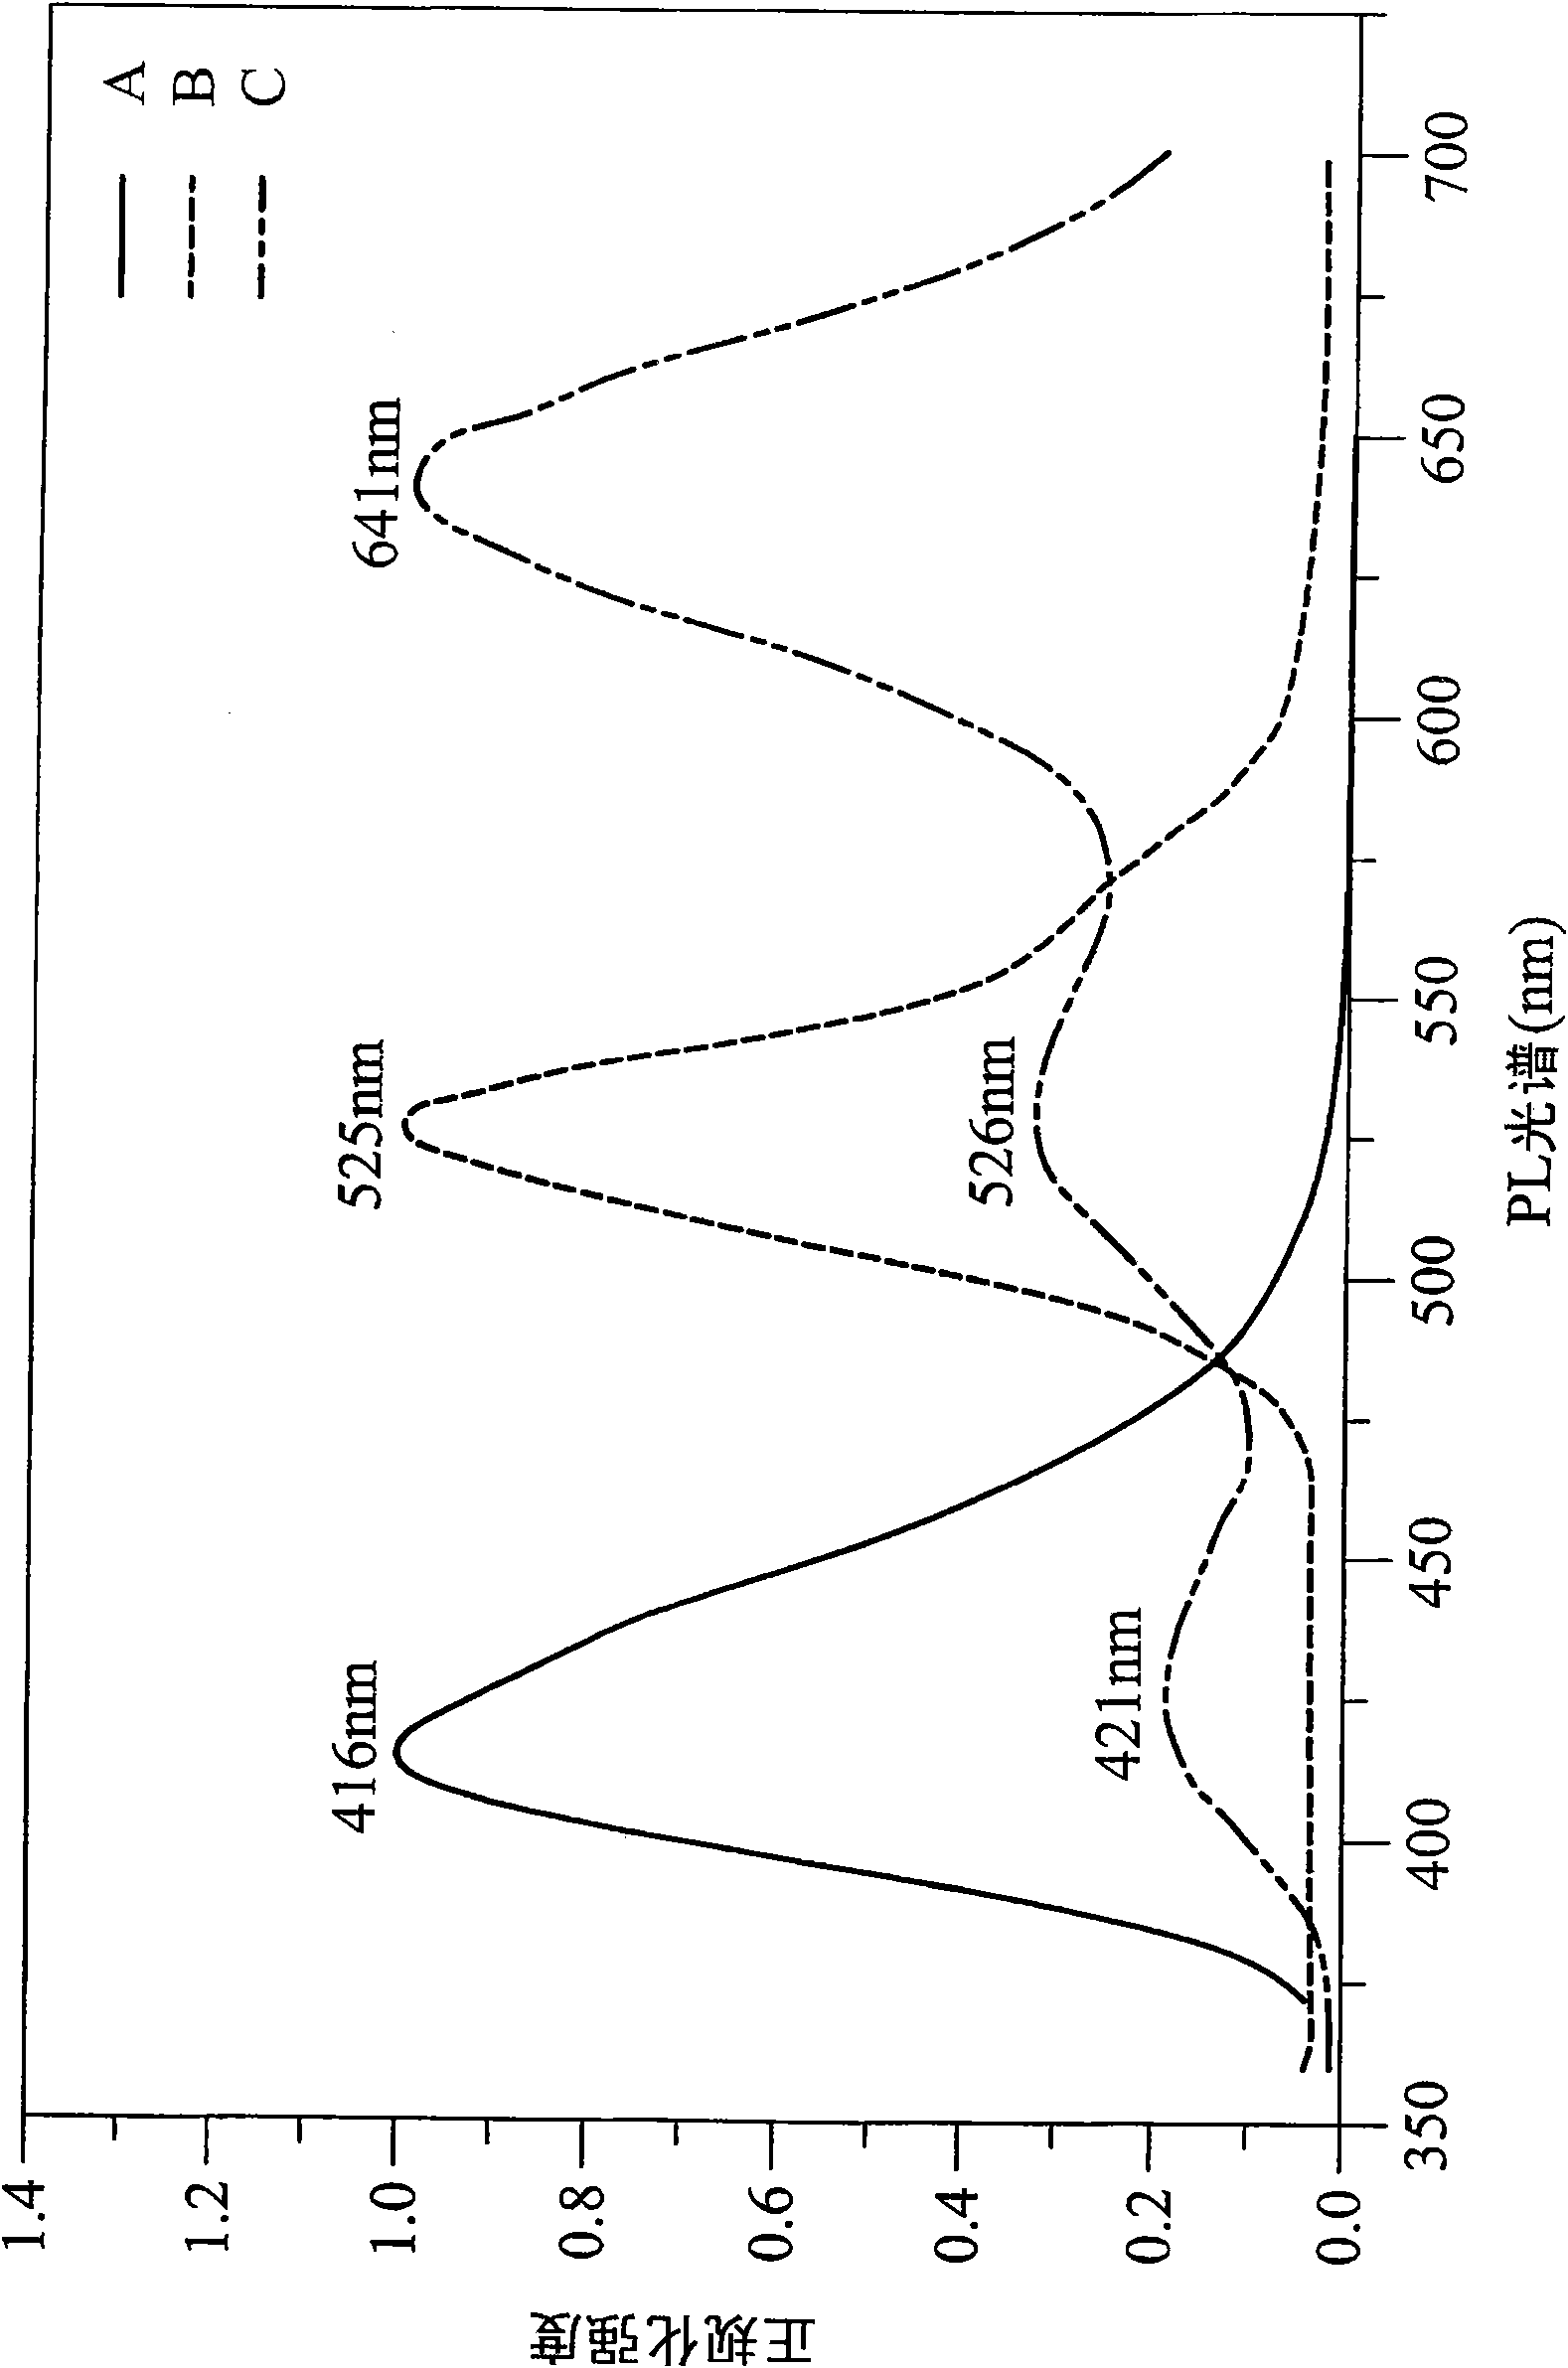 Phenanthrene benzene derivative and polymer thereof, copolymer containing phenanthrene benzene derivative and luminous material composition